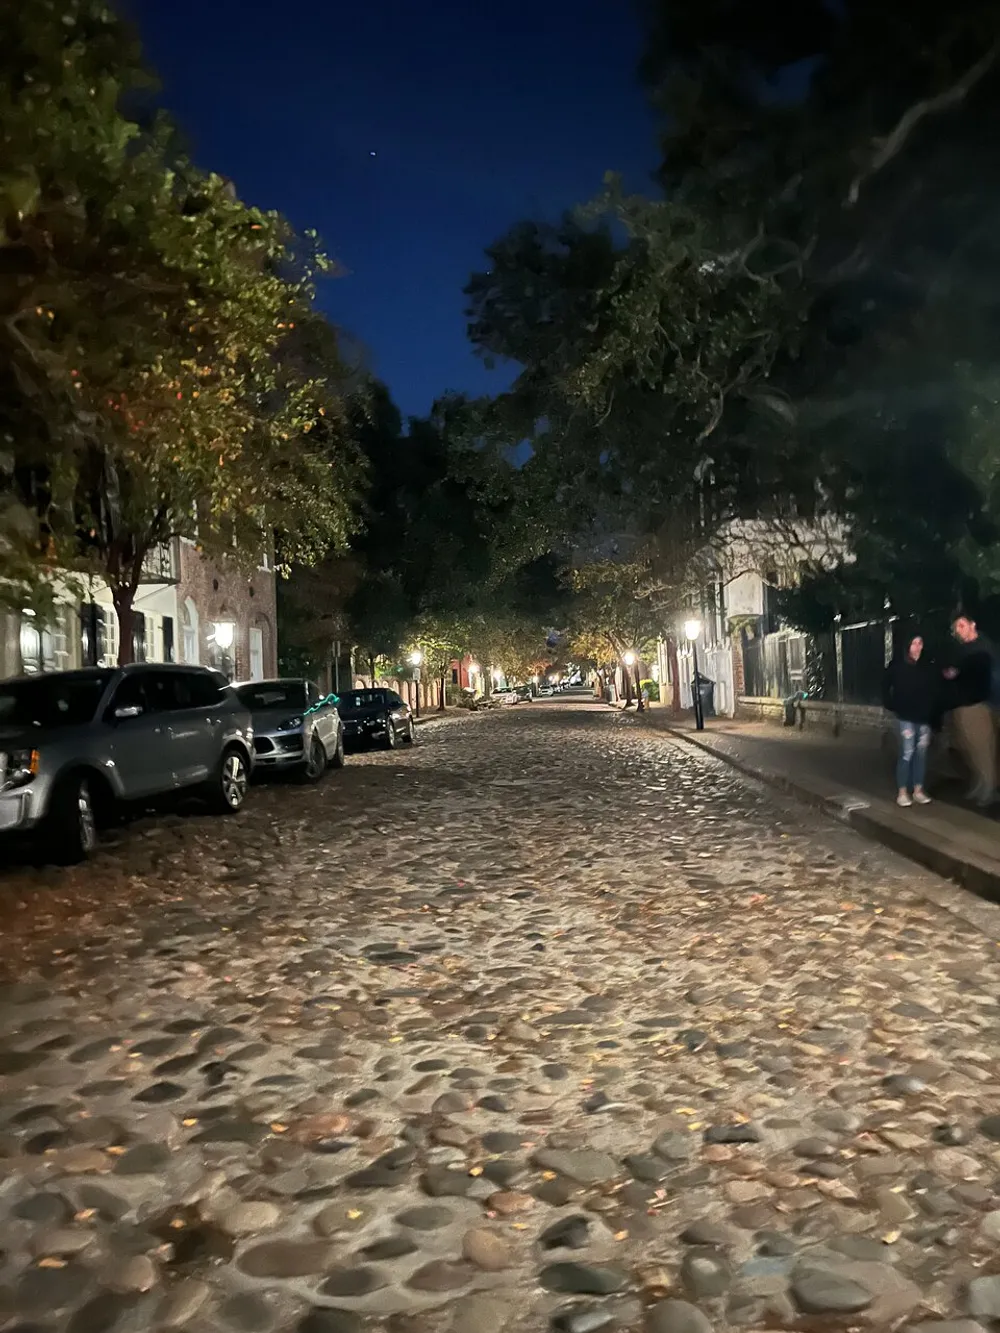 The image shows a cobblestone street lined with cars and trees at twilight with people walking along the sidewalk under the glow of streetlights